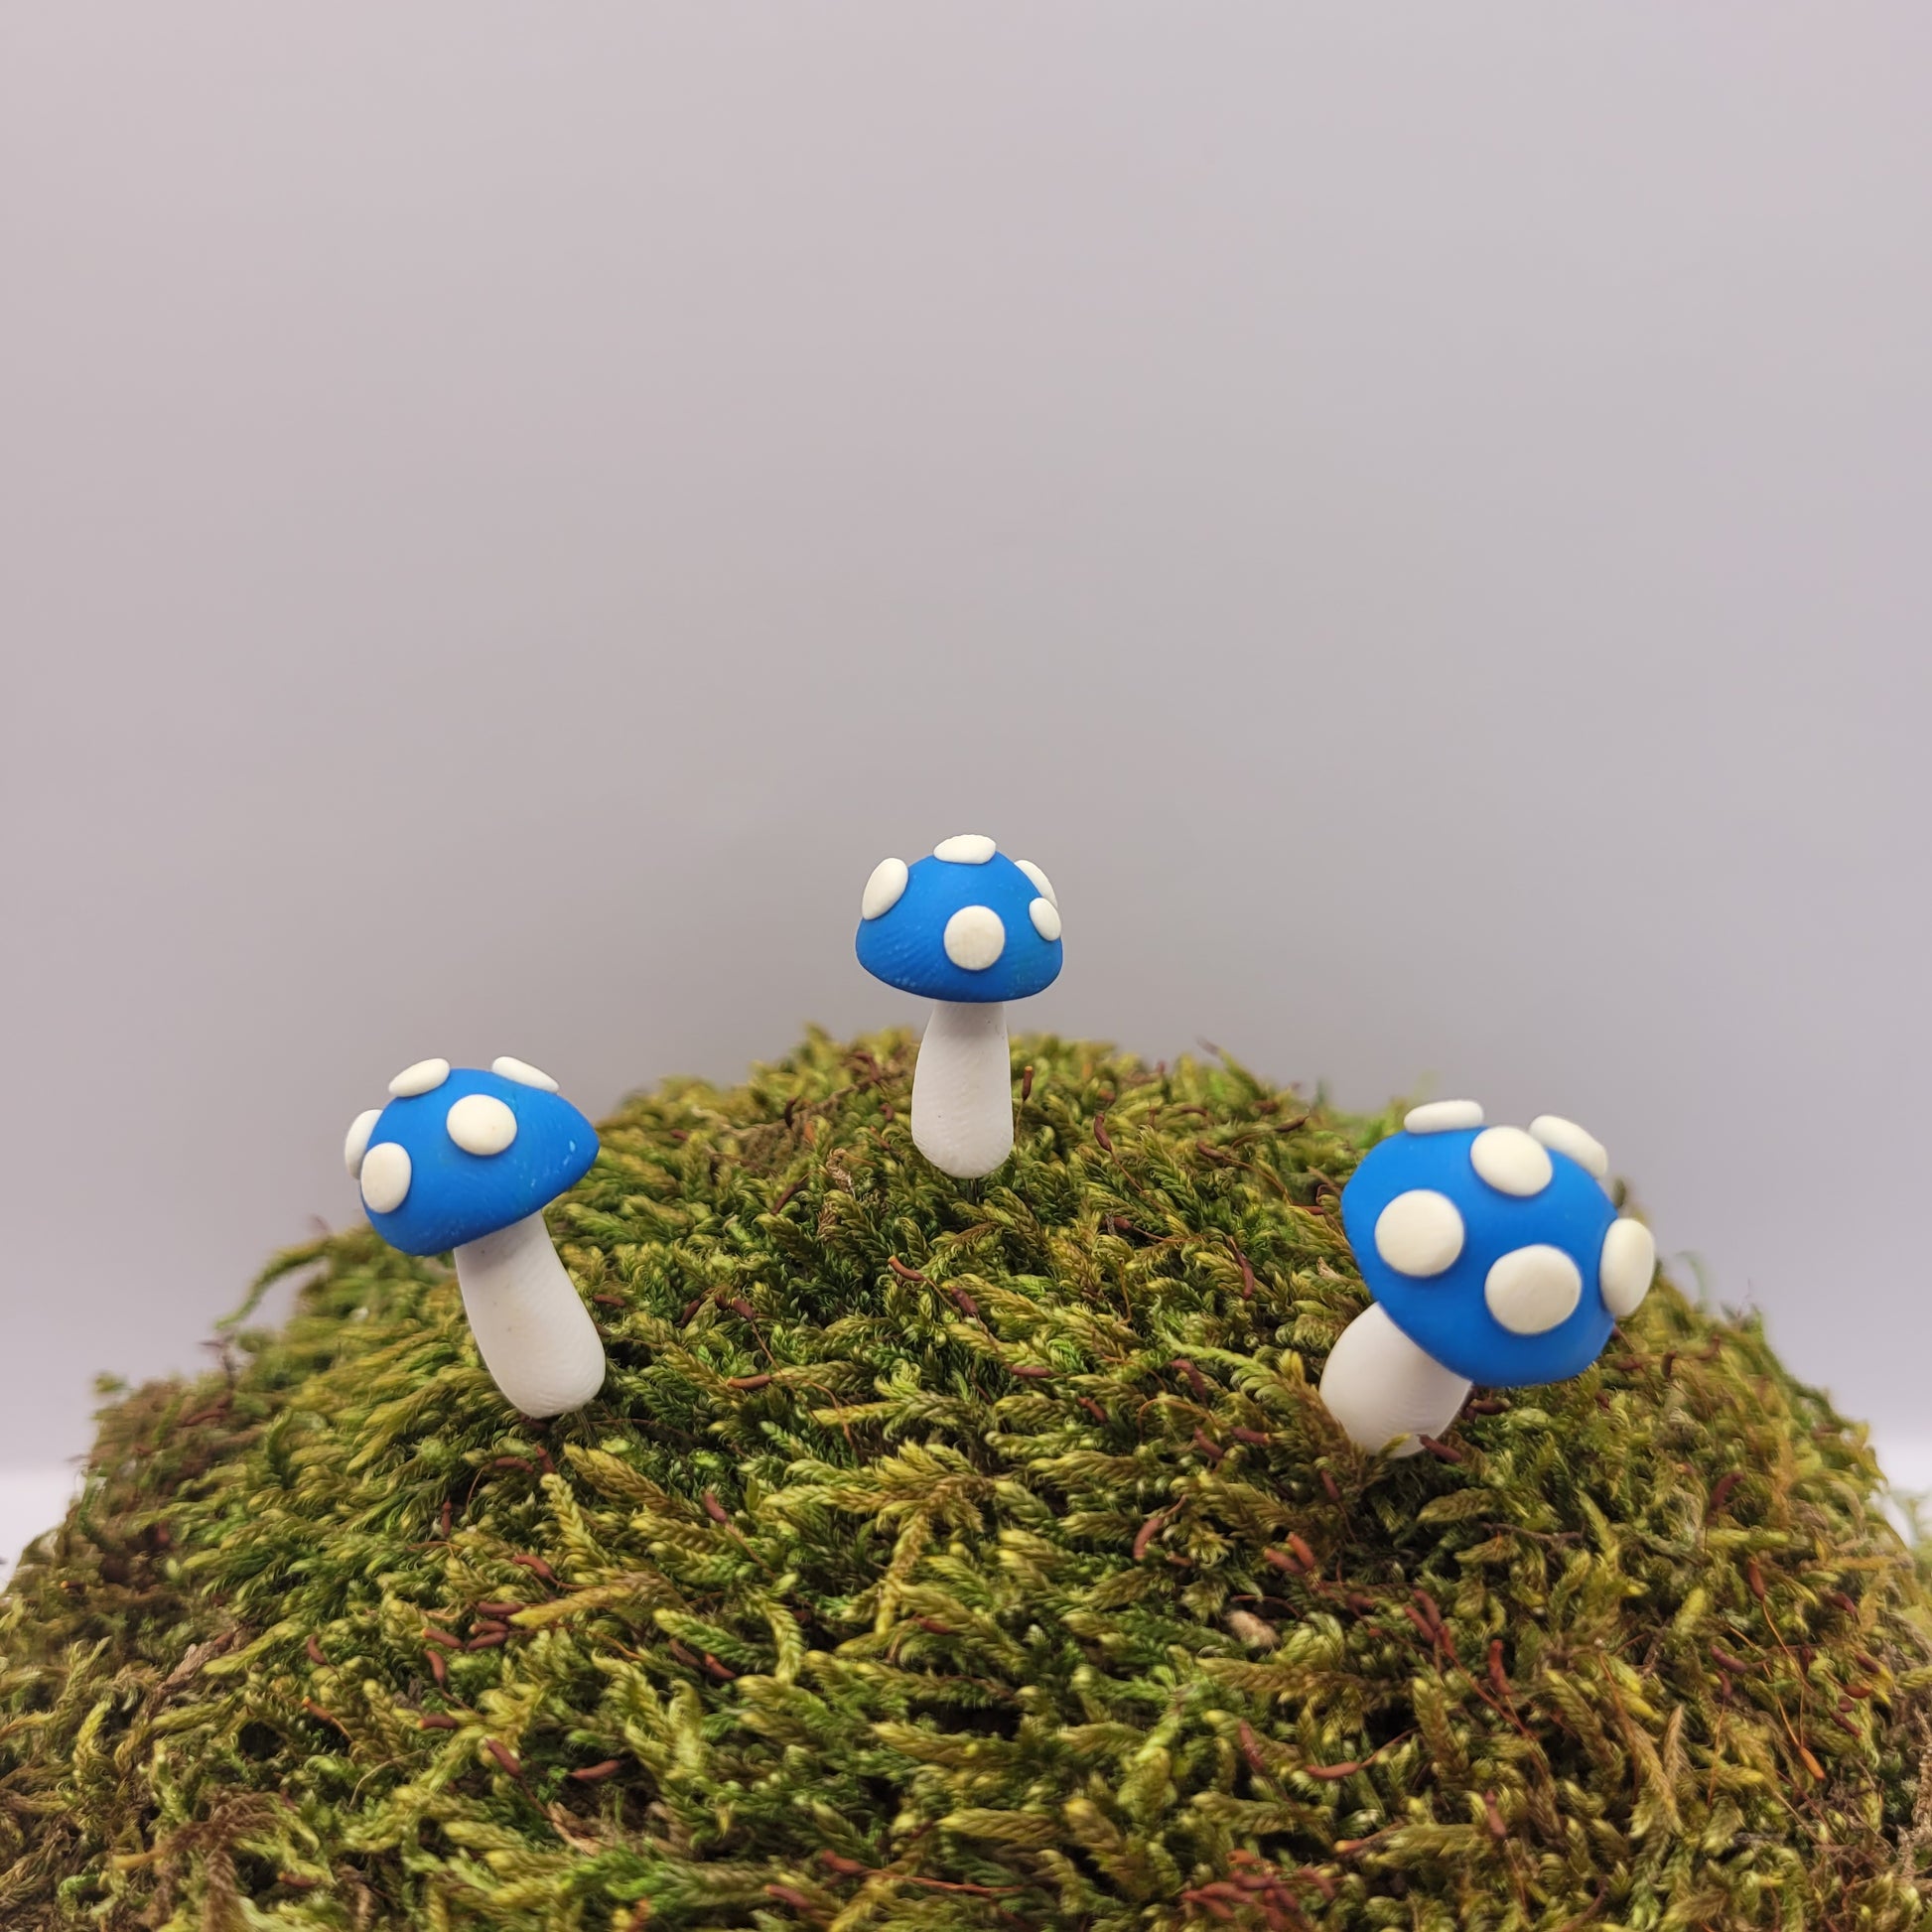 Three small blue mushrooms with textured tops stand on a preserved moss hill.